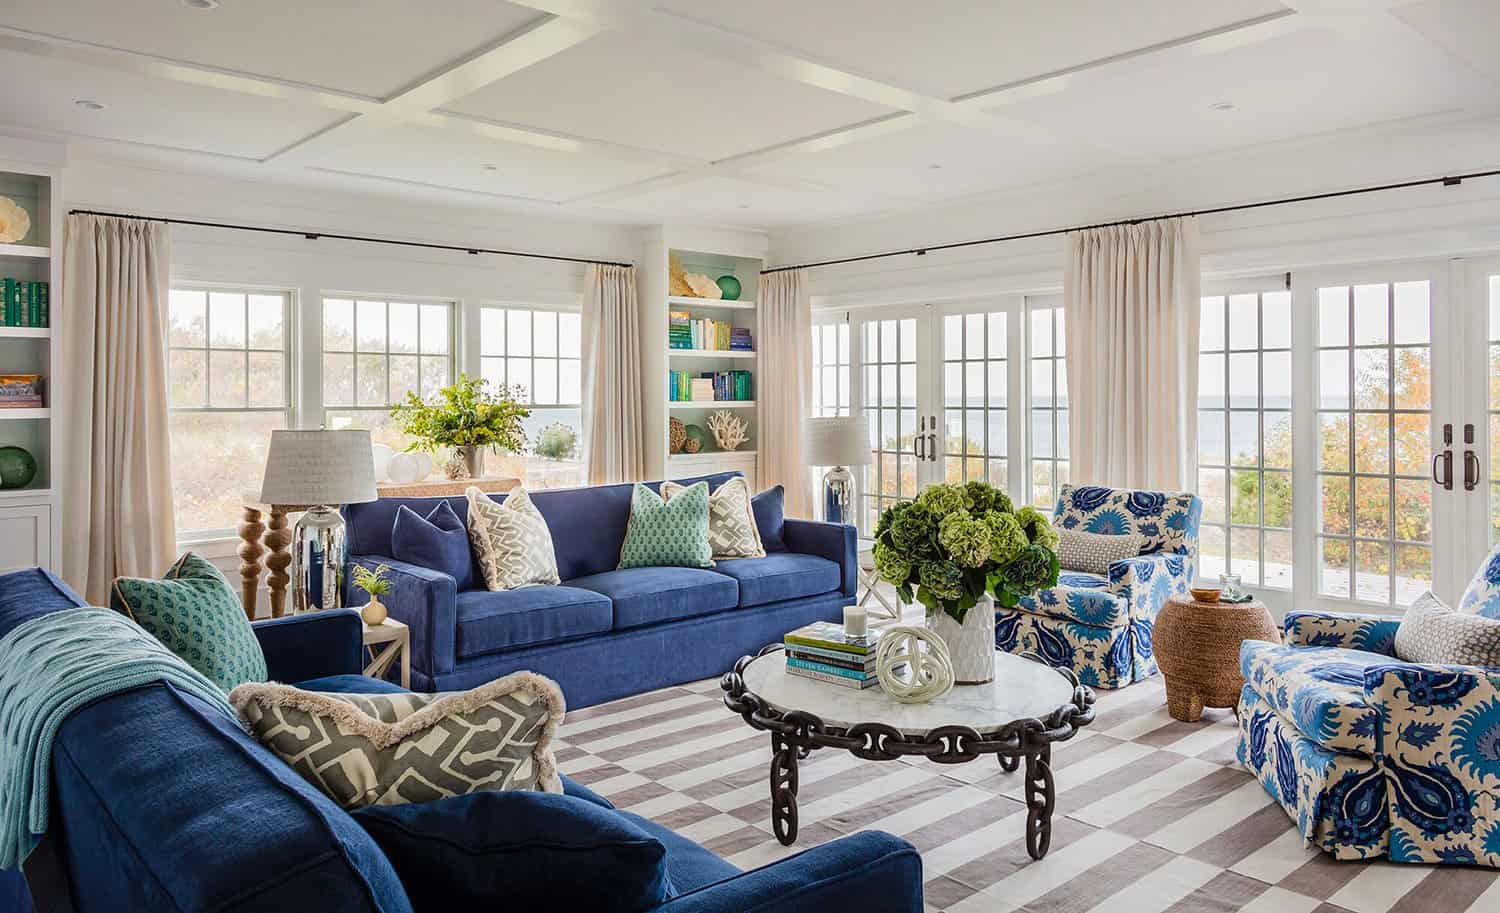 A charming beachfront home in Cape Cod with a playful nautical vibe